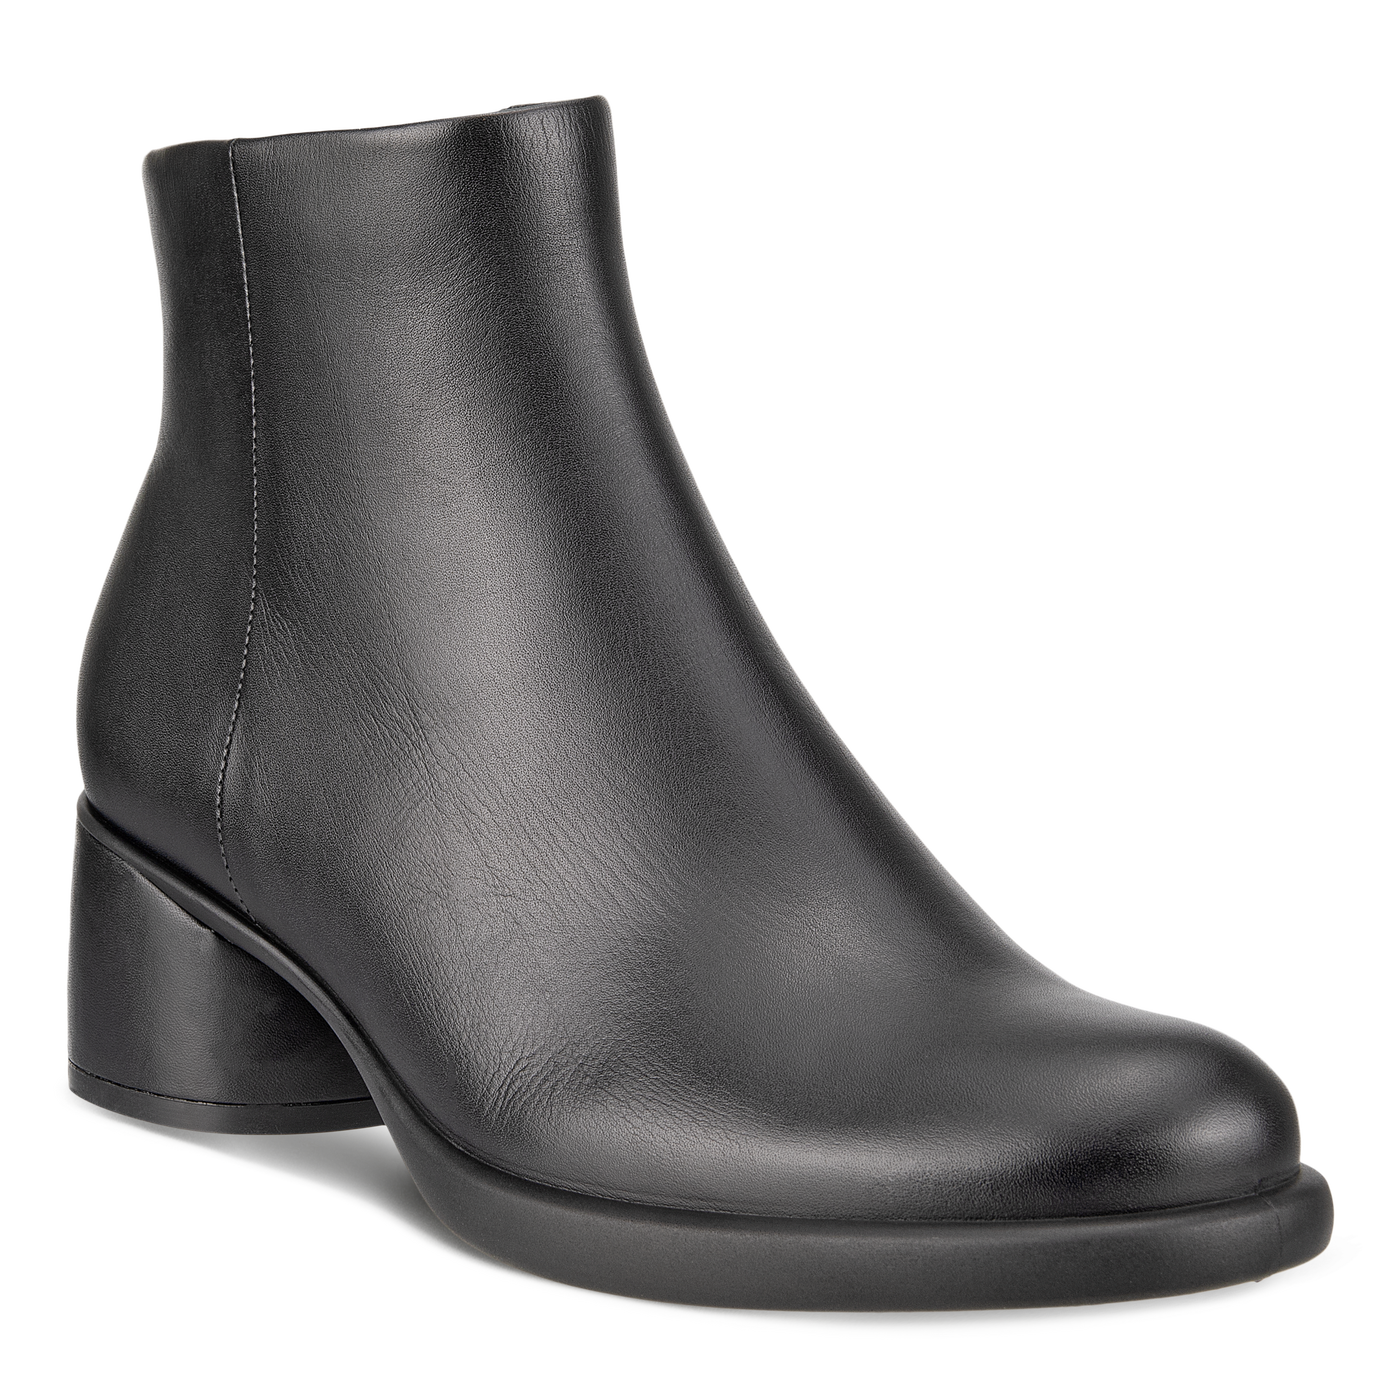 ECCO WOMEN'S SCULPTED LX 35 ANKLE BOOT